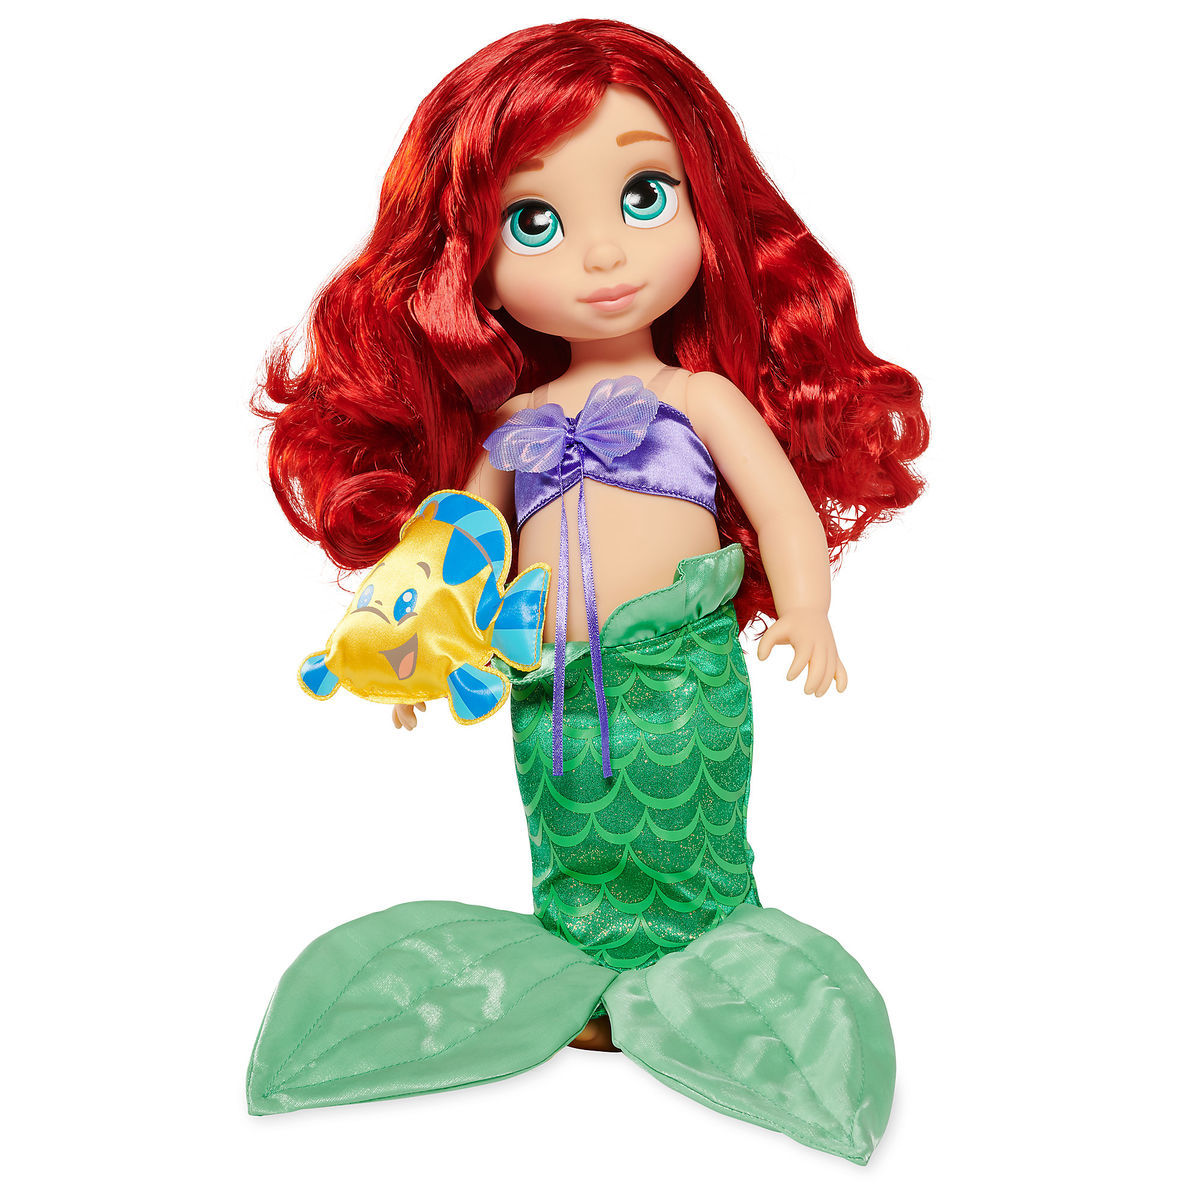 Disney 2019 Animators' Collection The Little Mermaid Ariel Doll New with Box